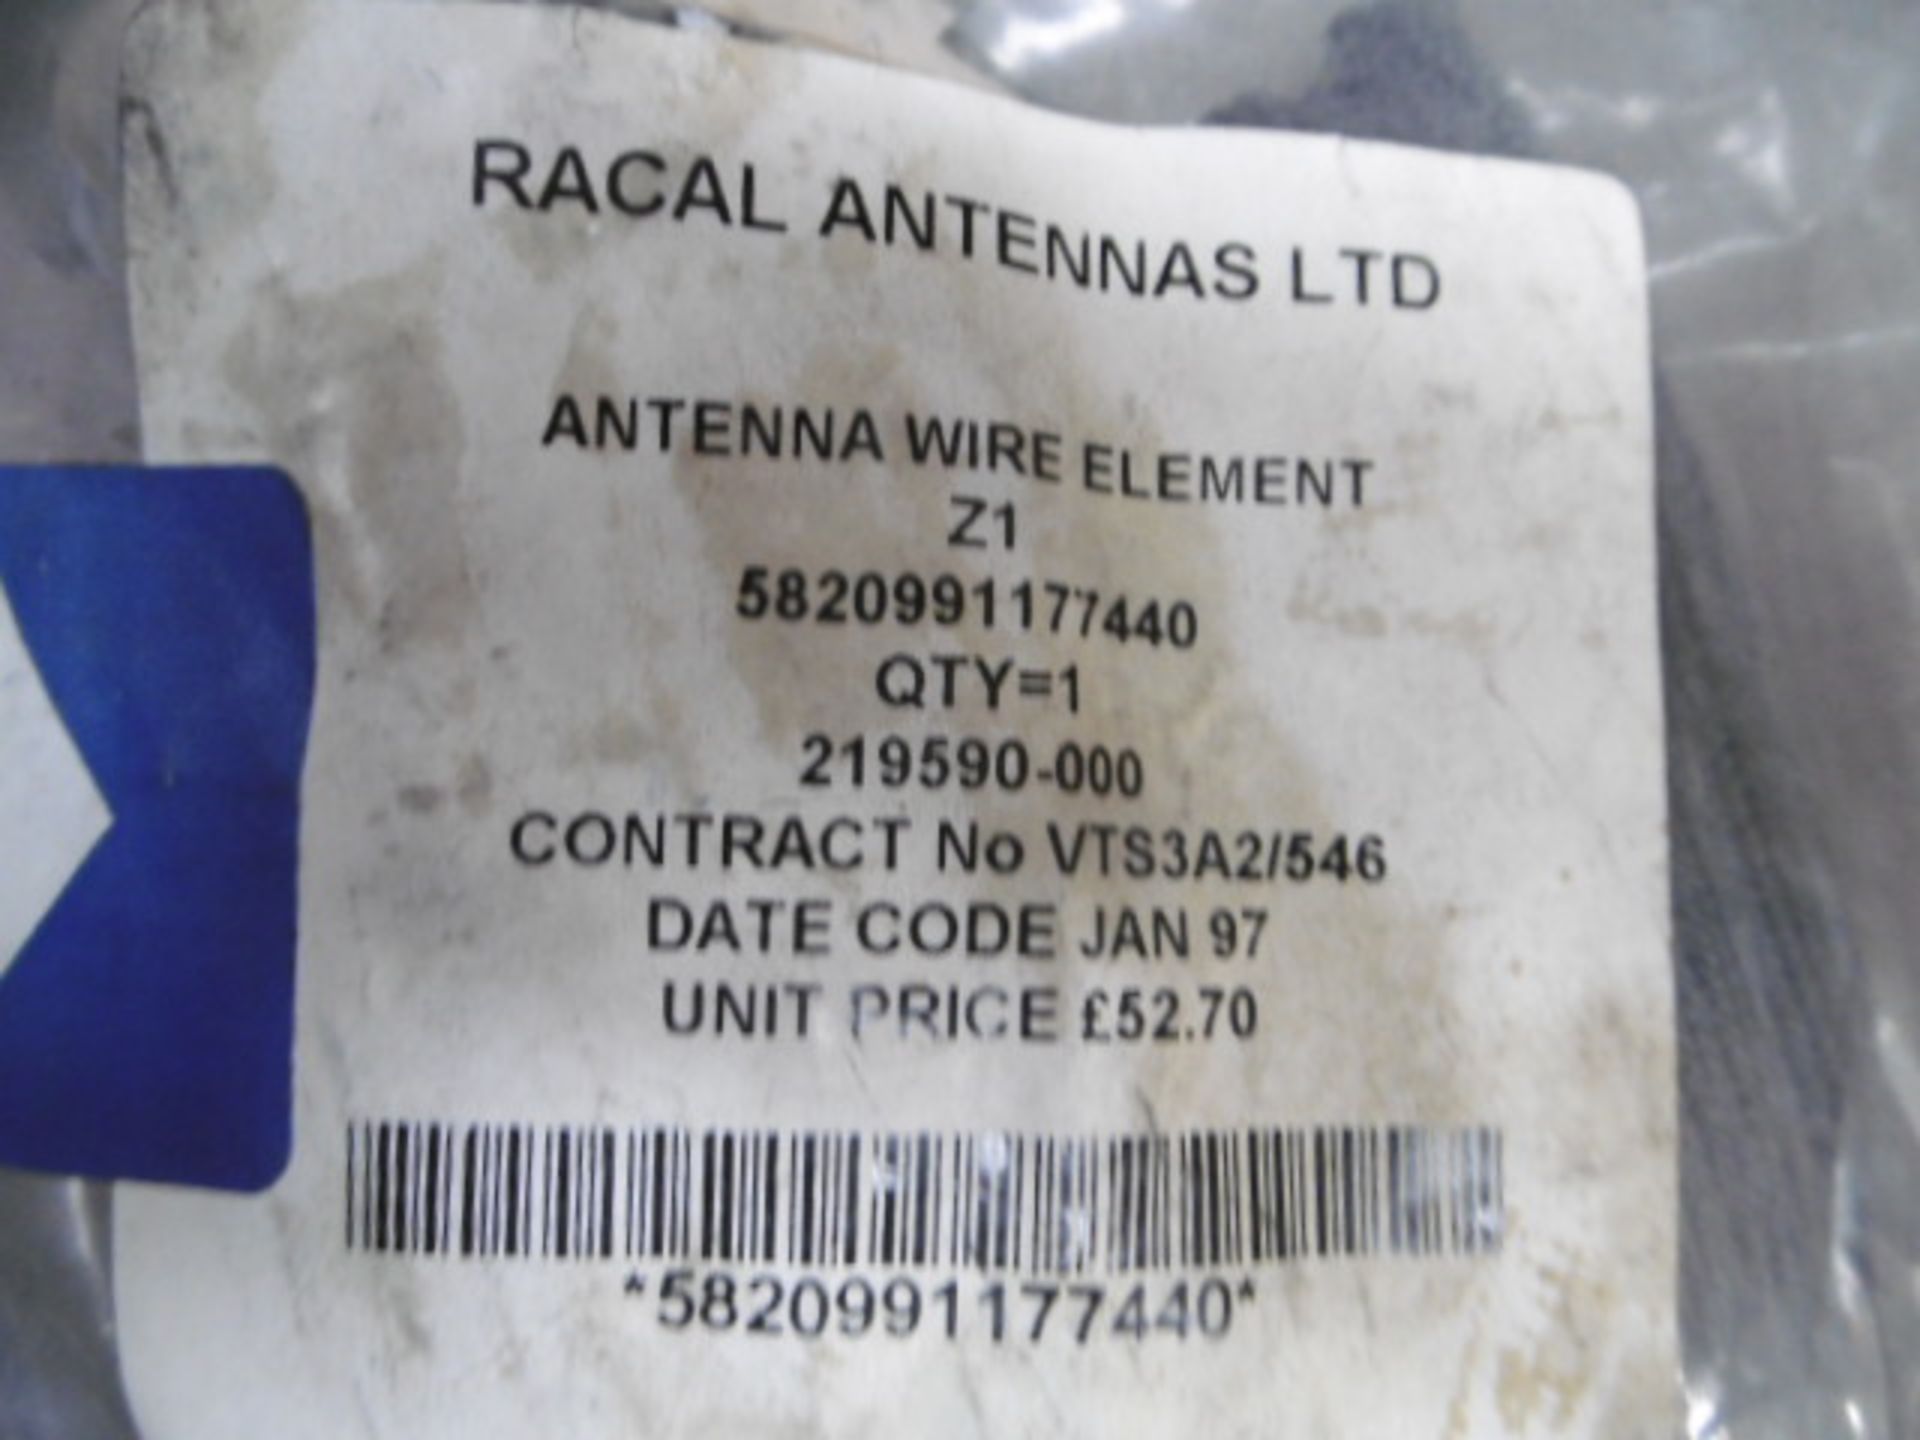 27 x Racal Antenna Wire Element - Image 2 of 3